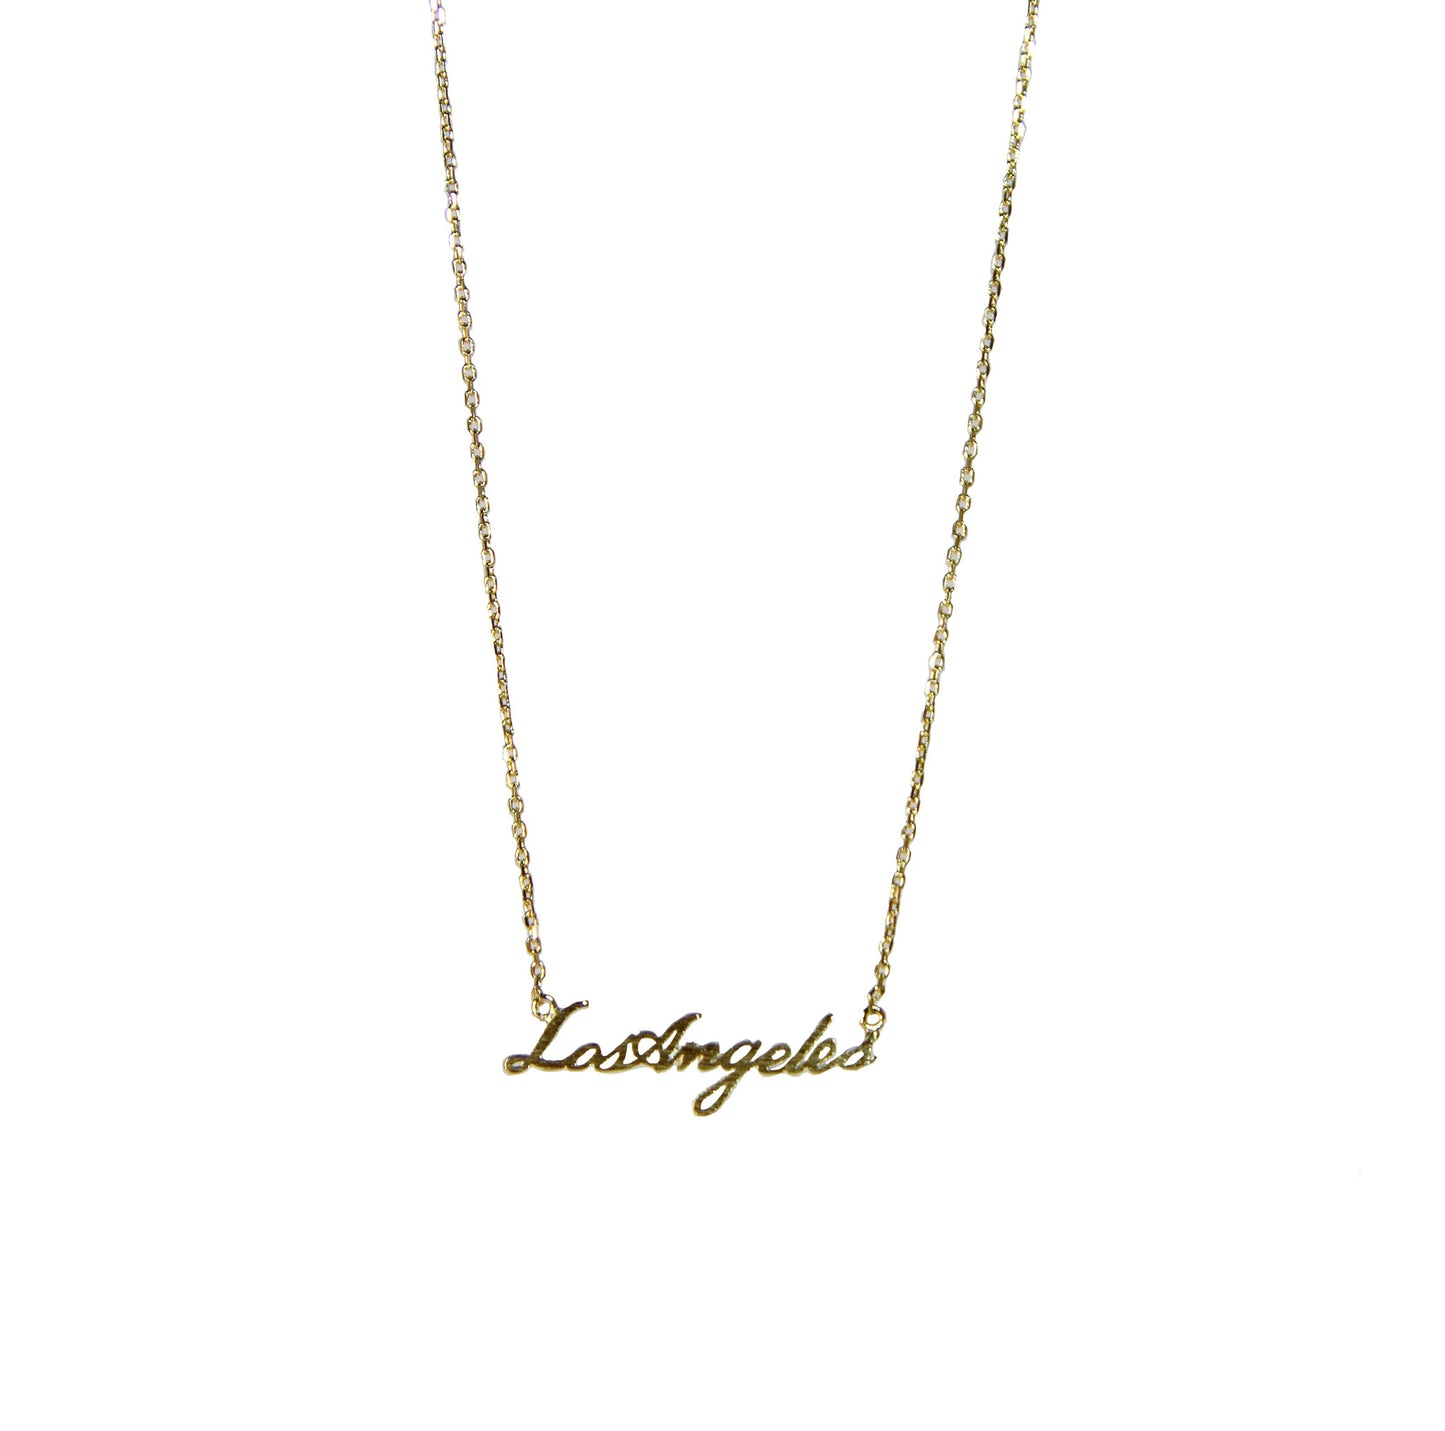 Los Angeles Gold Necklace. Represent Your City By Wearing This Cute Statement Piece. Los Angeles, California. 18 inches